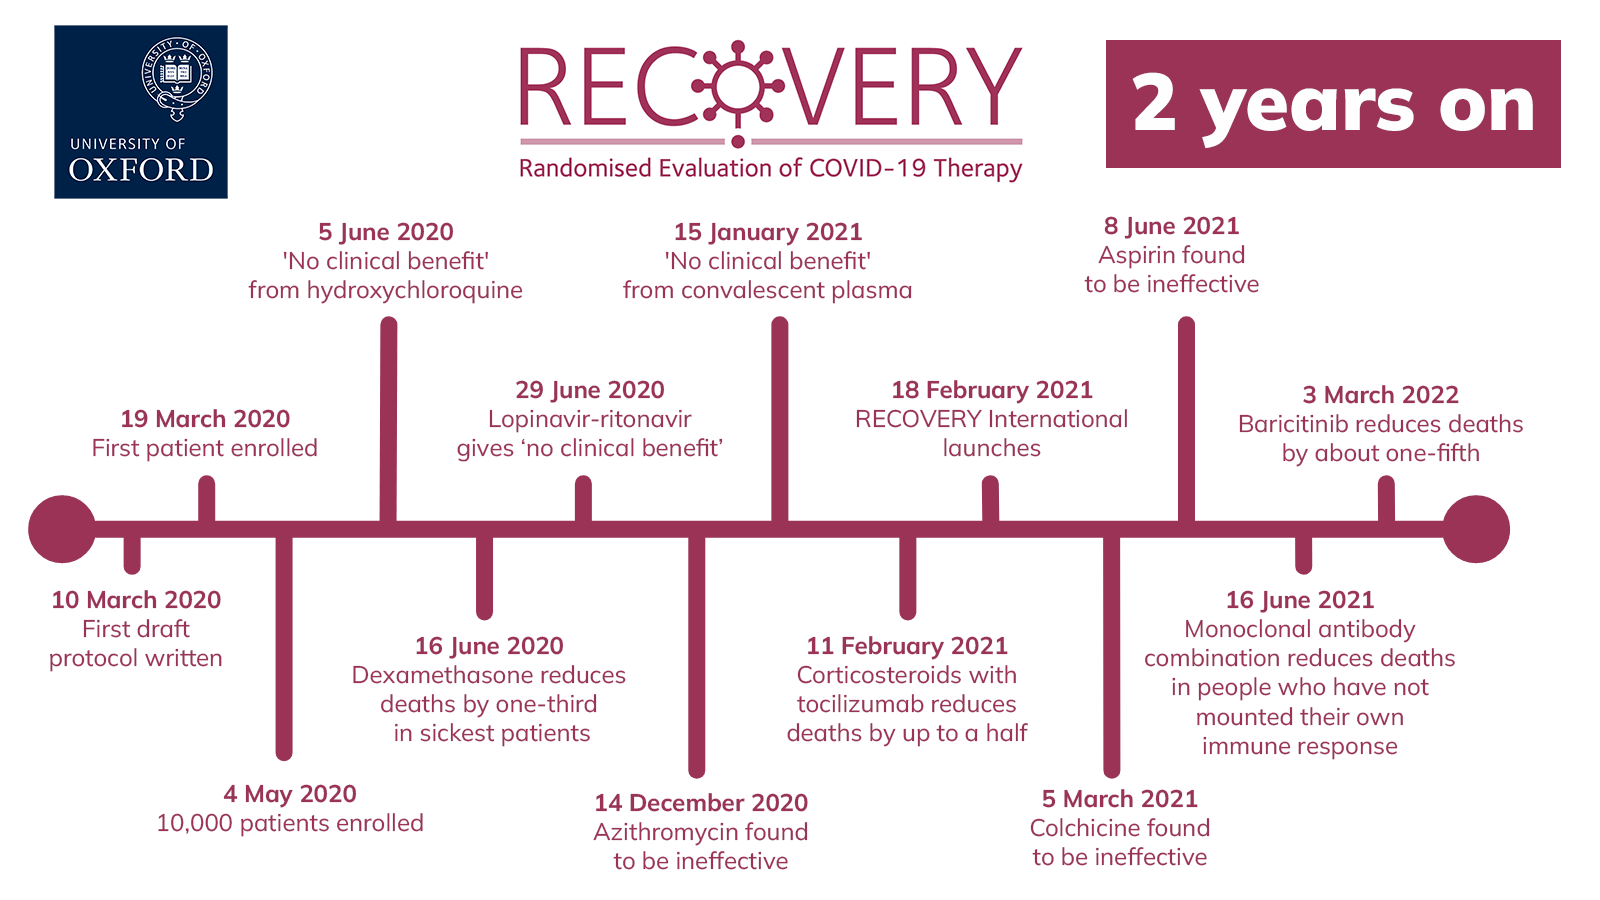 RECOVERY timeline